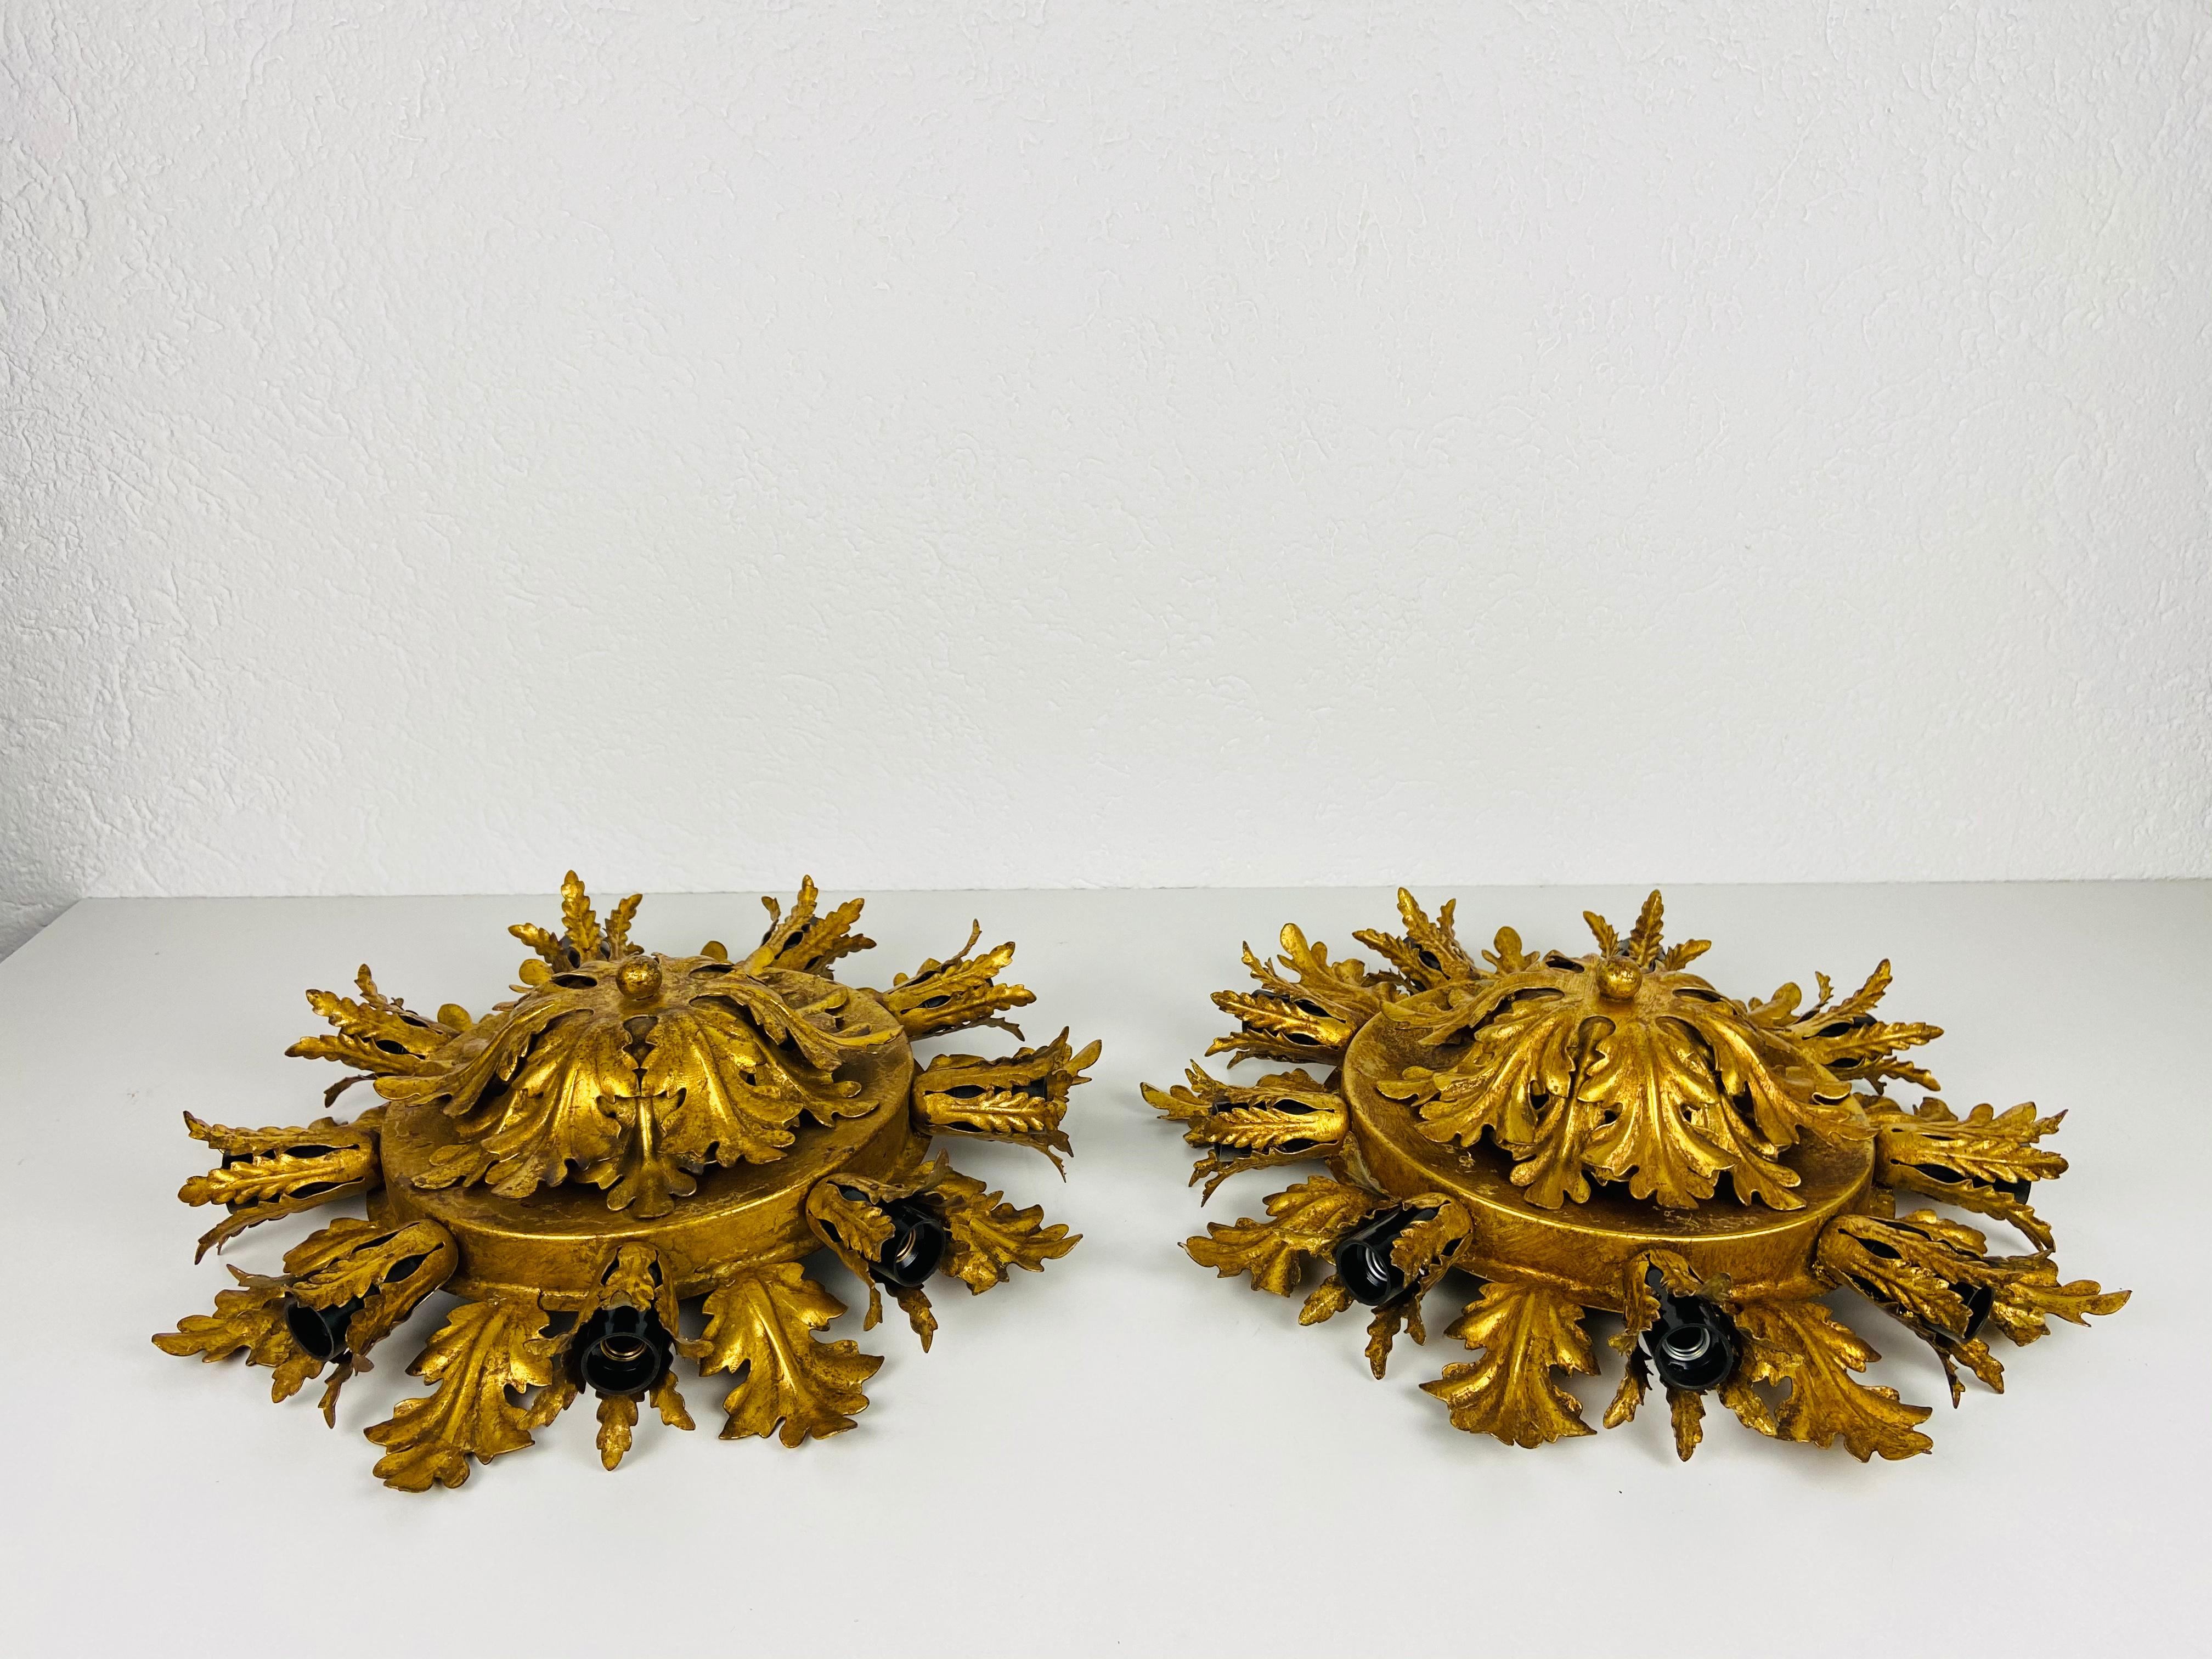 A set of brass flushmounts by Banci made in Italy in the 1950s. The lamp has a beautiful wheat sheaf design. It is made in the period of Hollywood Regency. 

The light requires E14 light bulbs. Works with both 120/220V. Very good vintage